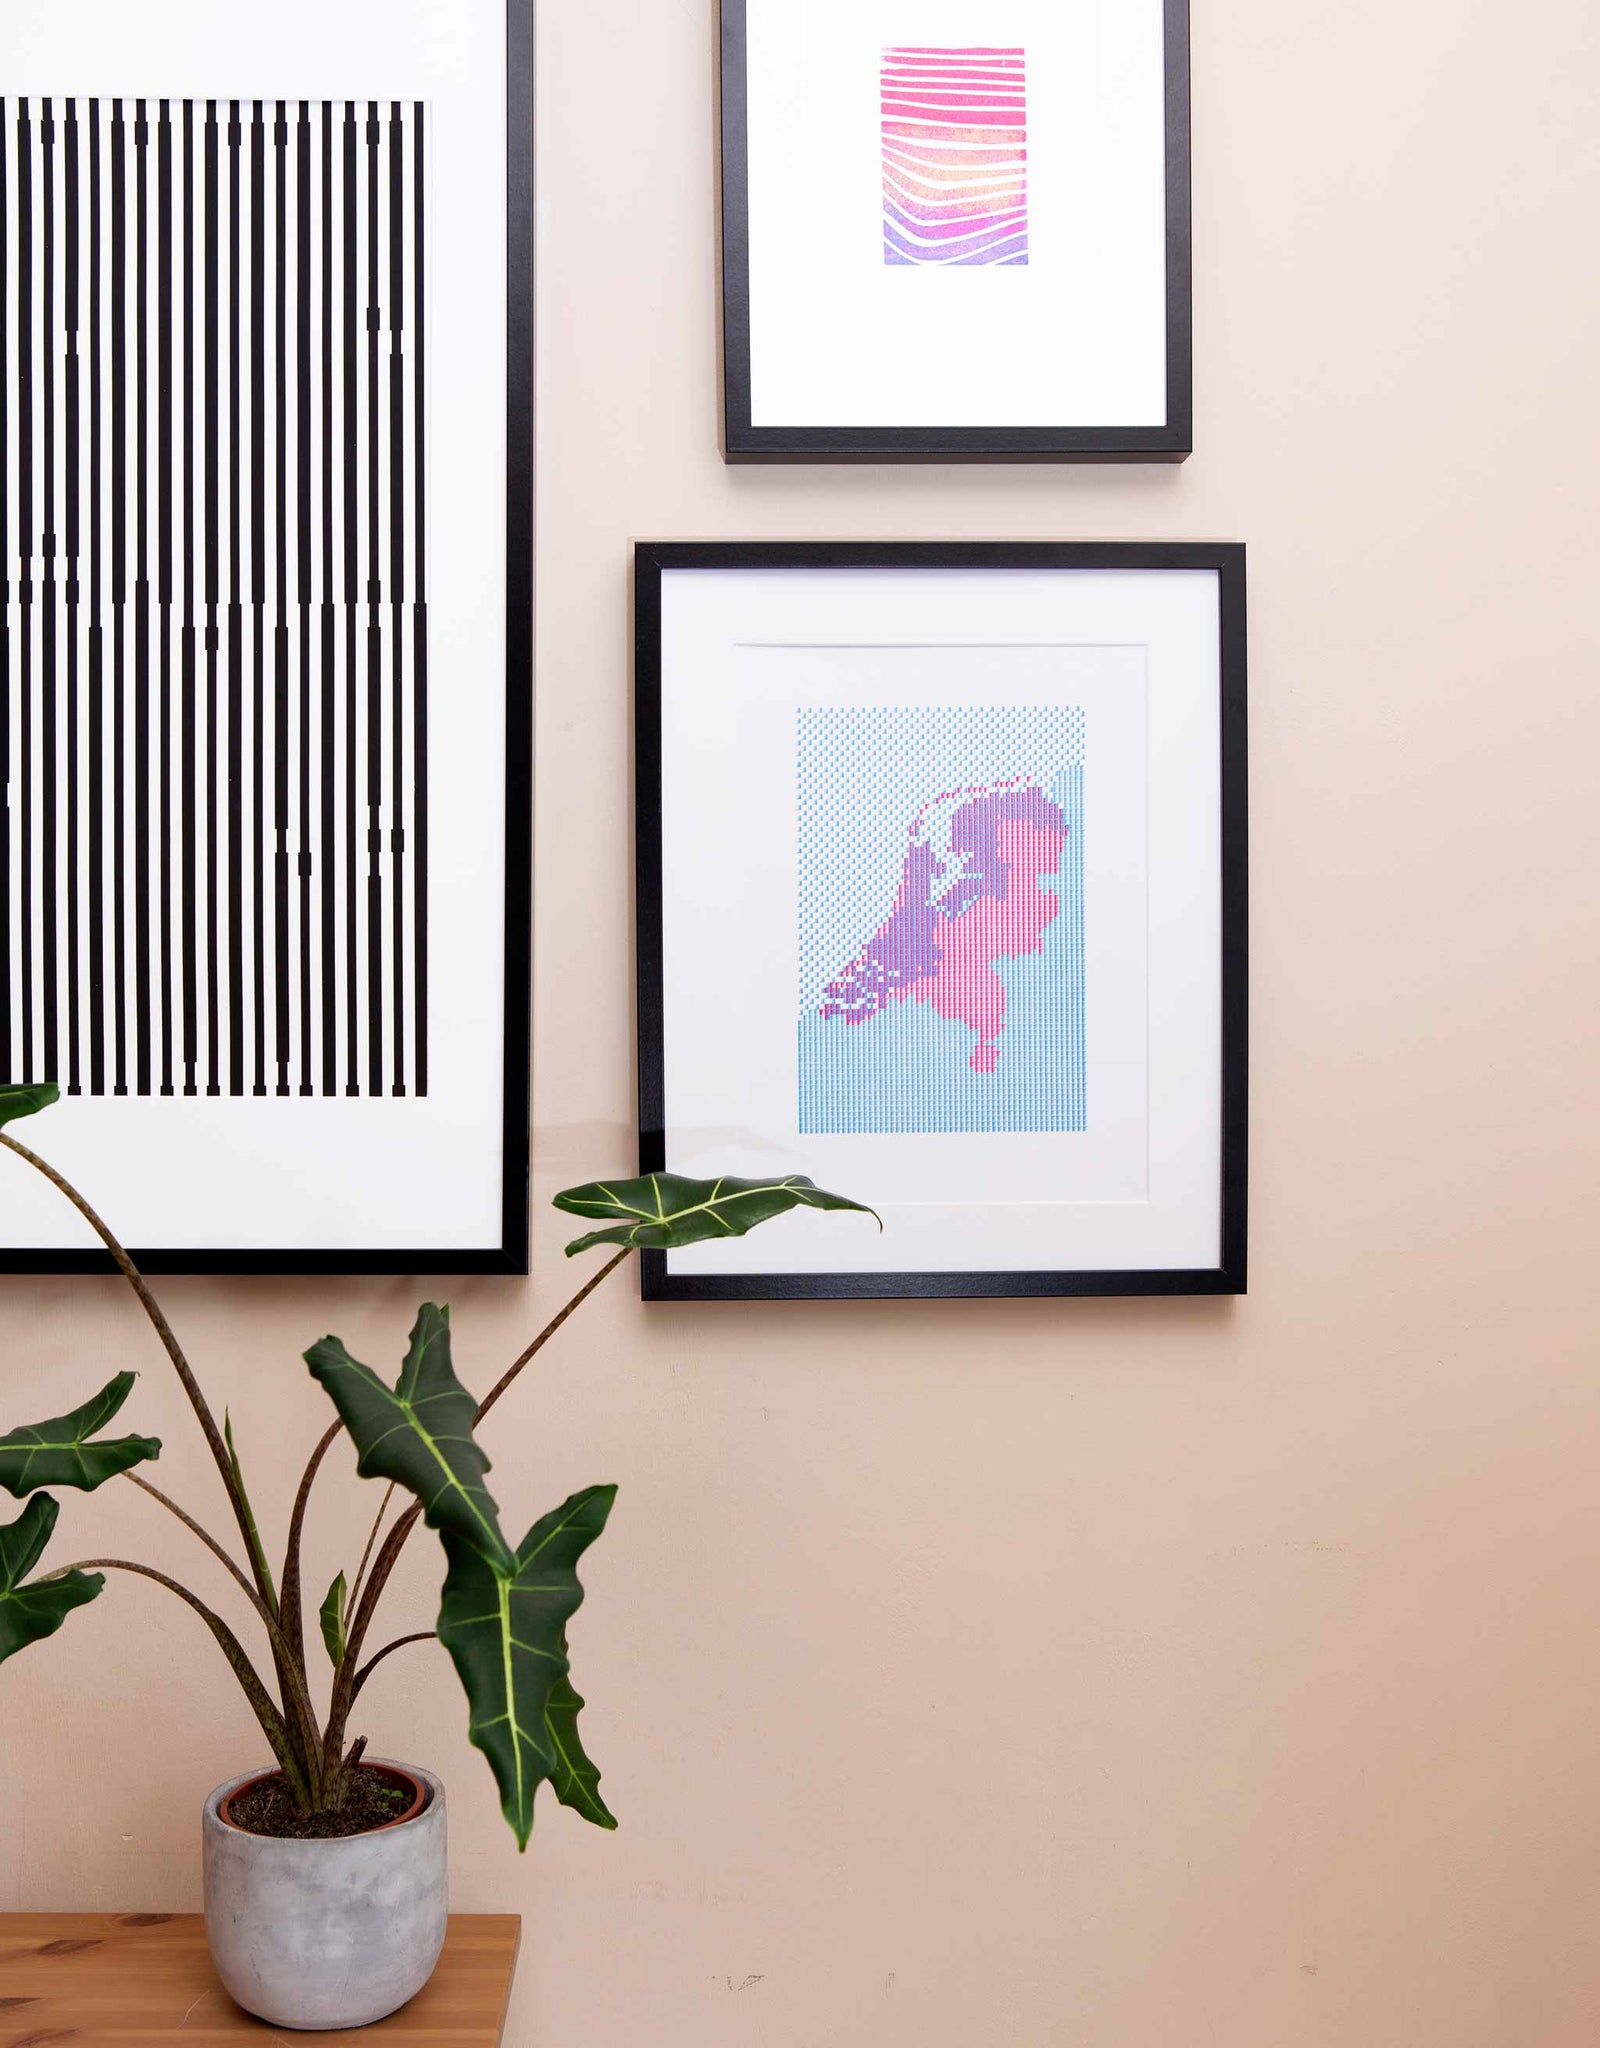 Letterpress patterned map of The Netherlands in magenta and blue. Shown in black frame on wall with plant and other art.